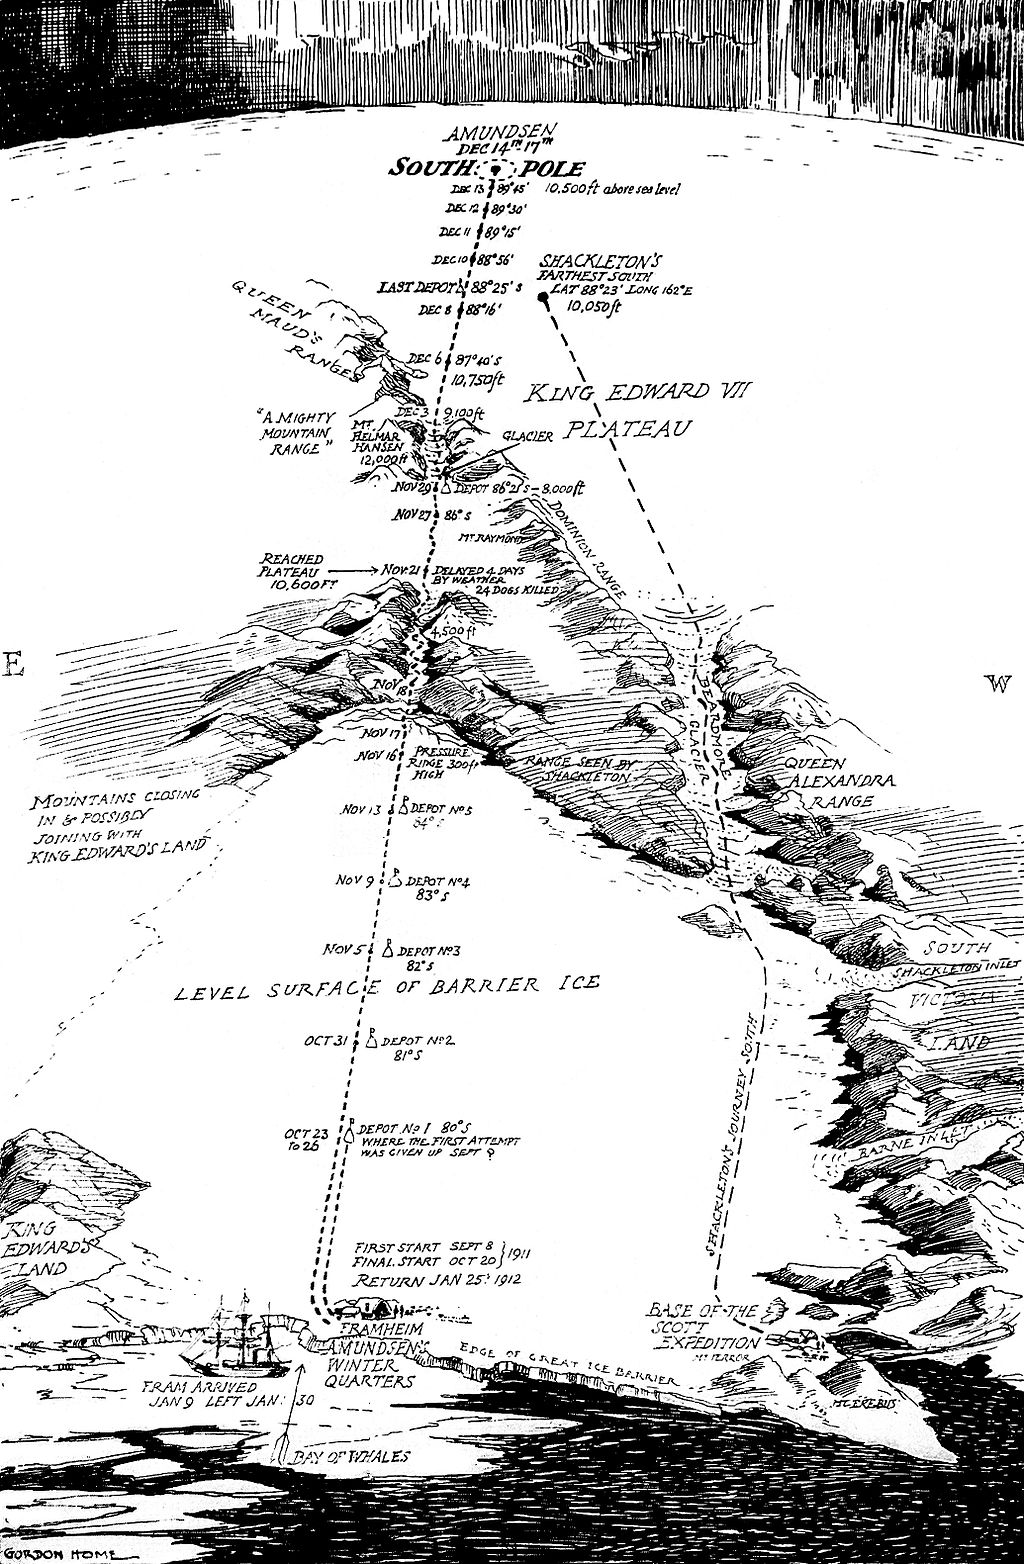 Map showing Amundsen's route to the pole, Oct–Dec 1911. The depots marked at 80, 81 and 82° were laid in the first season, Feb–March 1911. Shackleton's 1908–09 route, as followed by Scott, is to the right. Credit: Gordon Home; public domain.Map showing Amundsen's route to the pole, Oct–Dec 1911. The depots marked at 80, 81 and 82° were laid in the first season, Feb–March 1911. Shackleton's 1908–09 route, as followed by Scott, is to the right. Credit: Gordon Home; public domain.